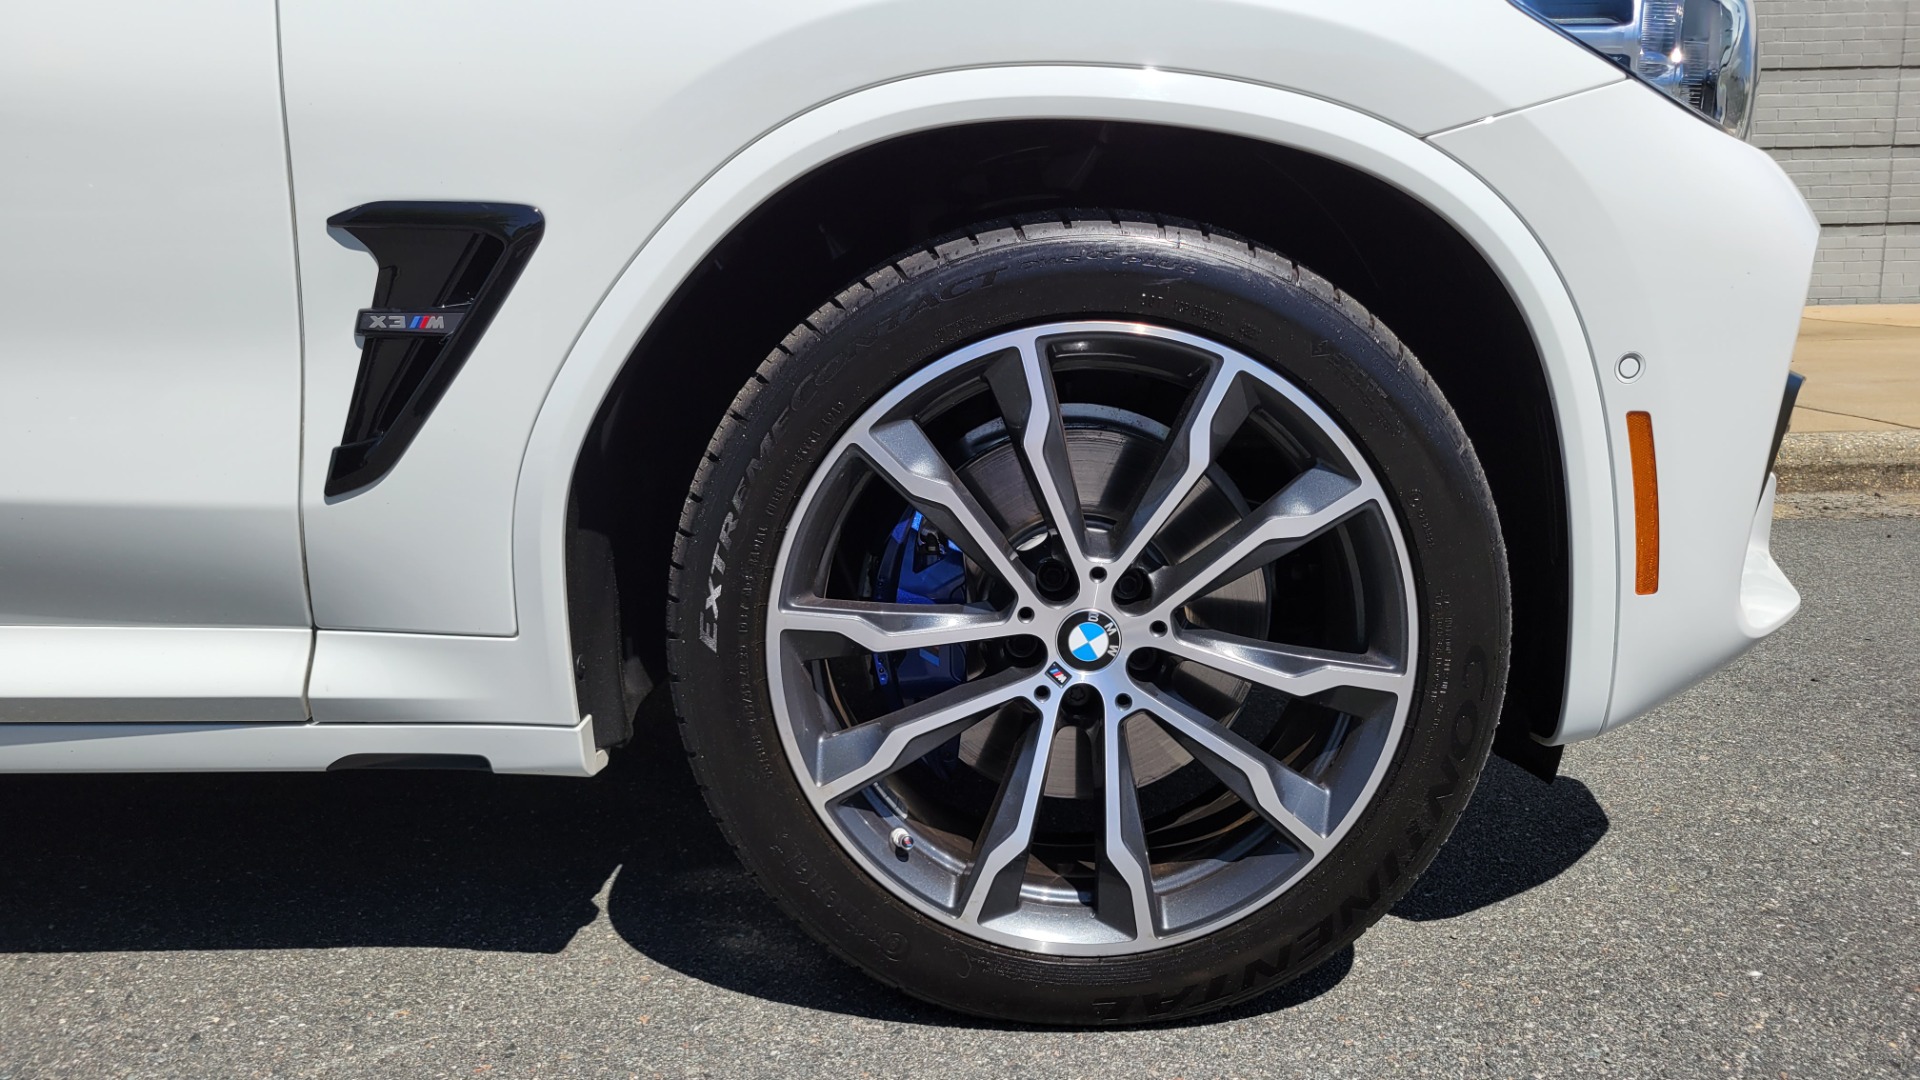 Used 2020 BMW X3 M40I EXECUTIVE PKG / DRVR ASST PLUS / H/K SND / HITCH / REARVIEW for sale $55,995 at Formula Imports in Charlotte NC 28227 90